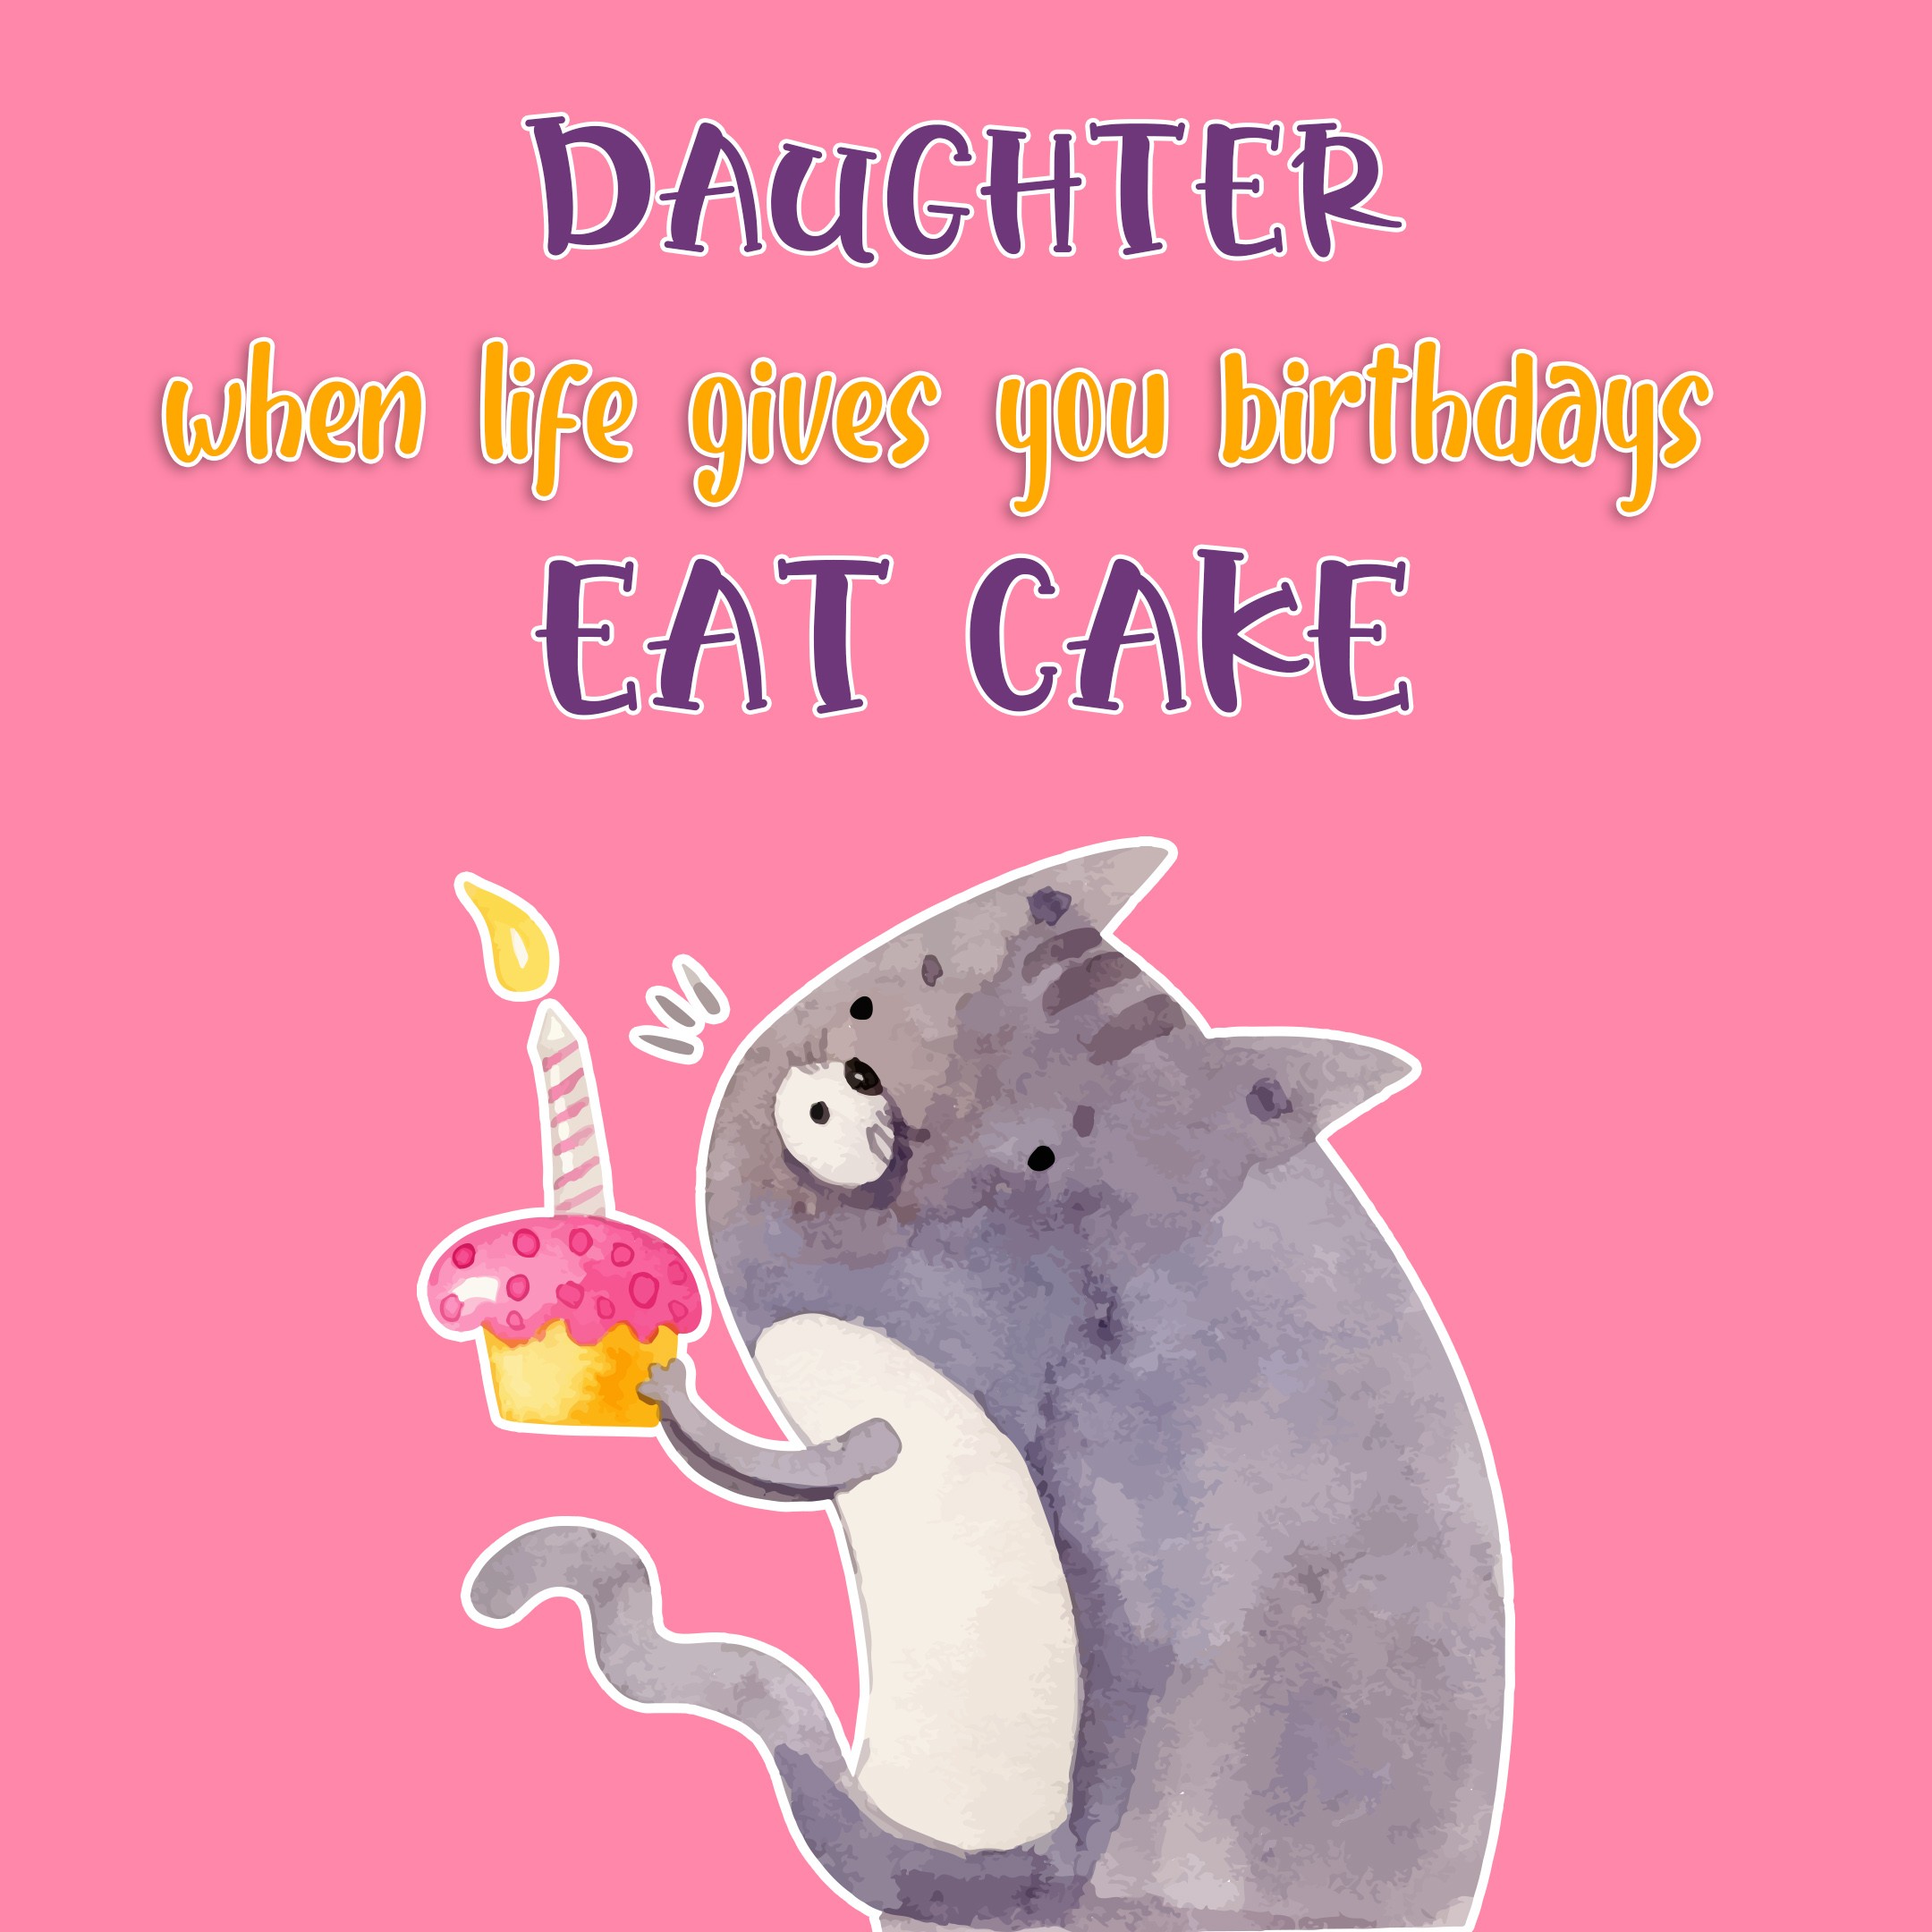 Free Happy Birthday Image For Daughter With Funny Cat - birthdayimg.com